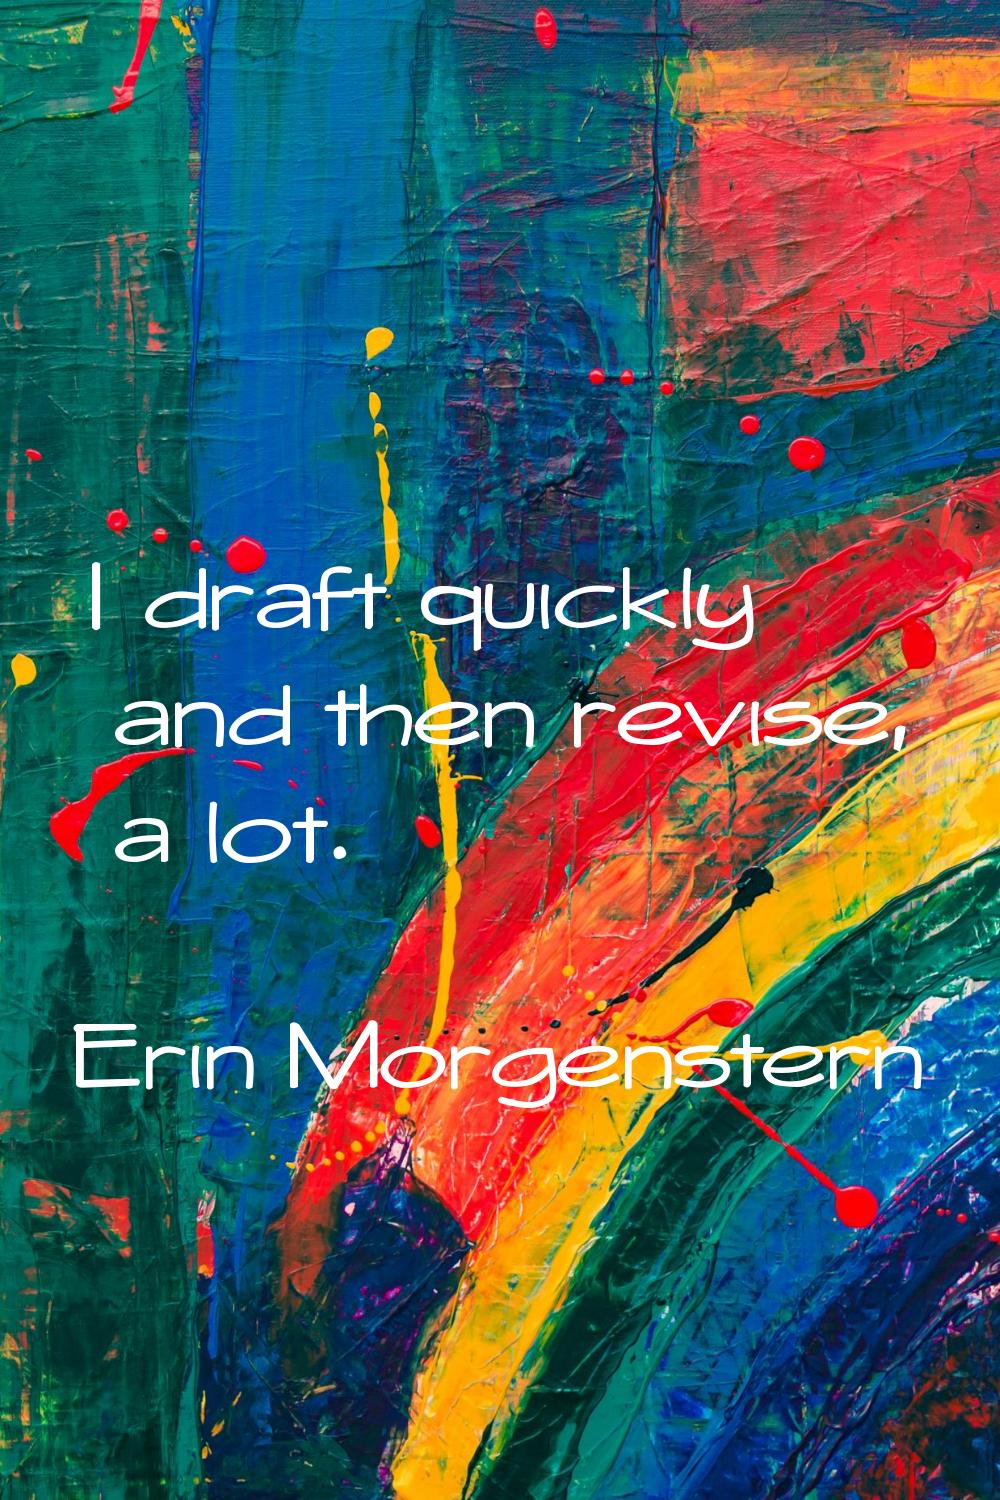 I draft quickly and then revise, a lot.